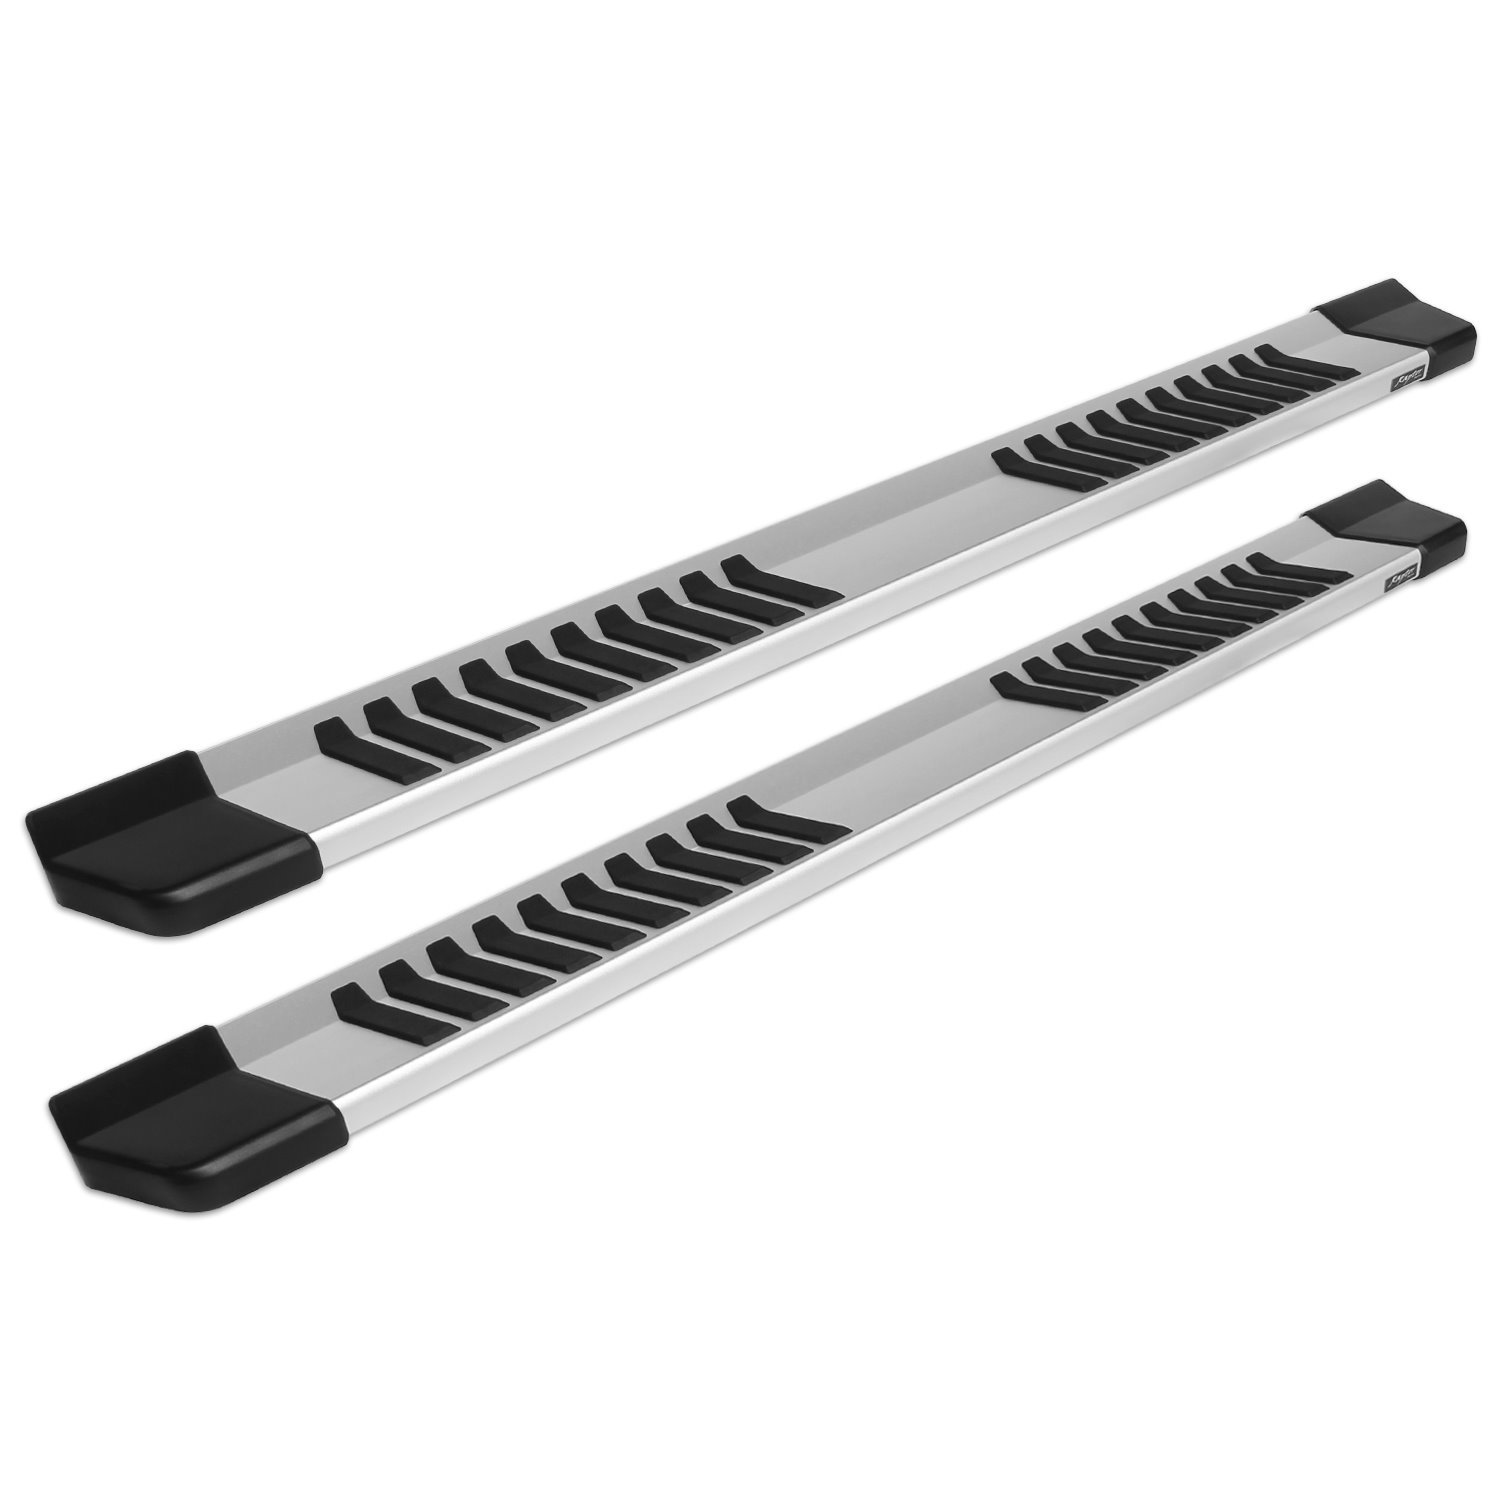 1703-0377 Raptor Series 6 in OEM Style Slide Track Running Boards, Brushed Aluminum, Fits Select Ford Ranger Crew Cab